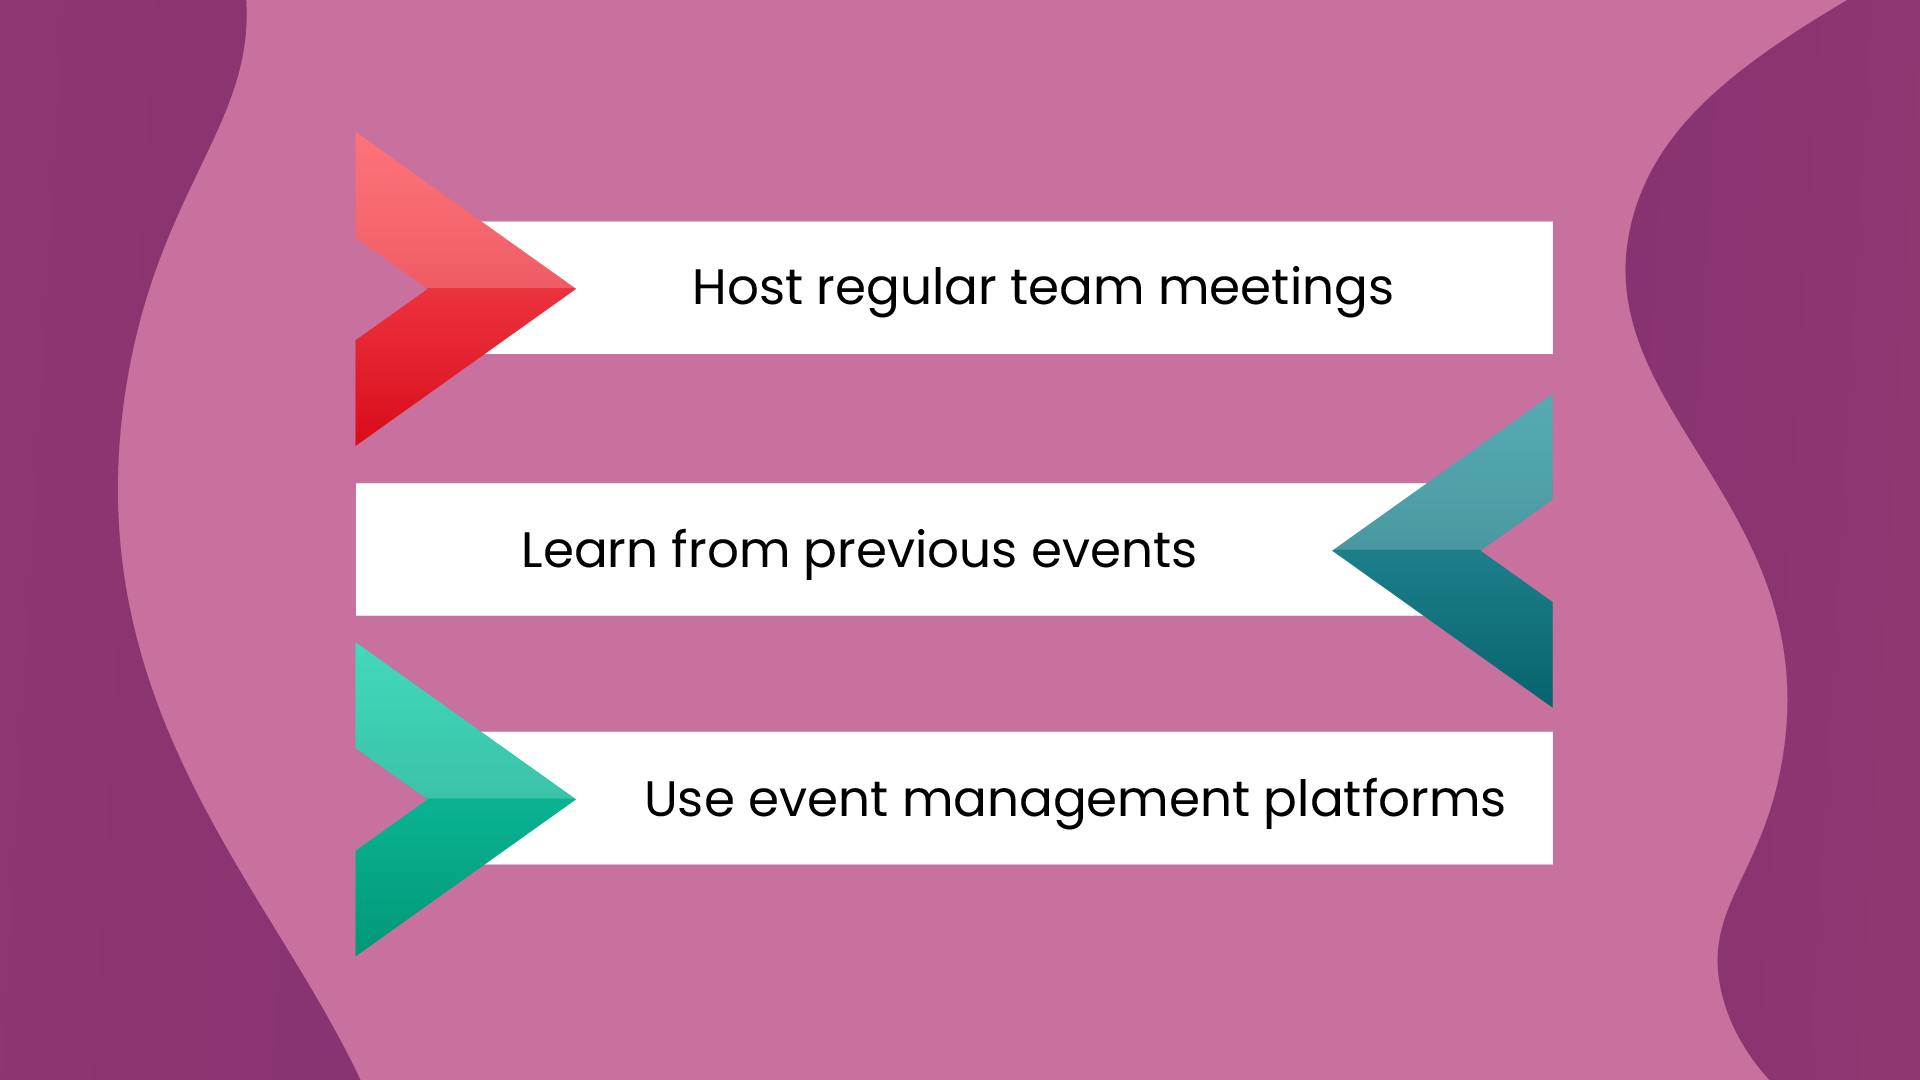 Additional tips for better nonprofit event planning